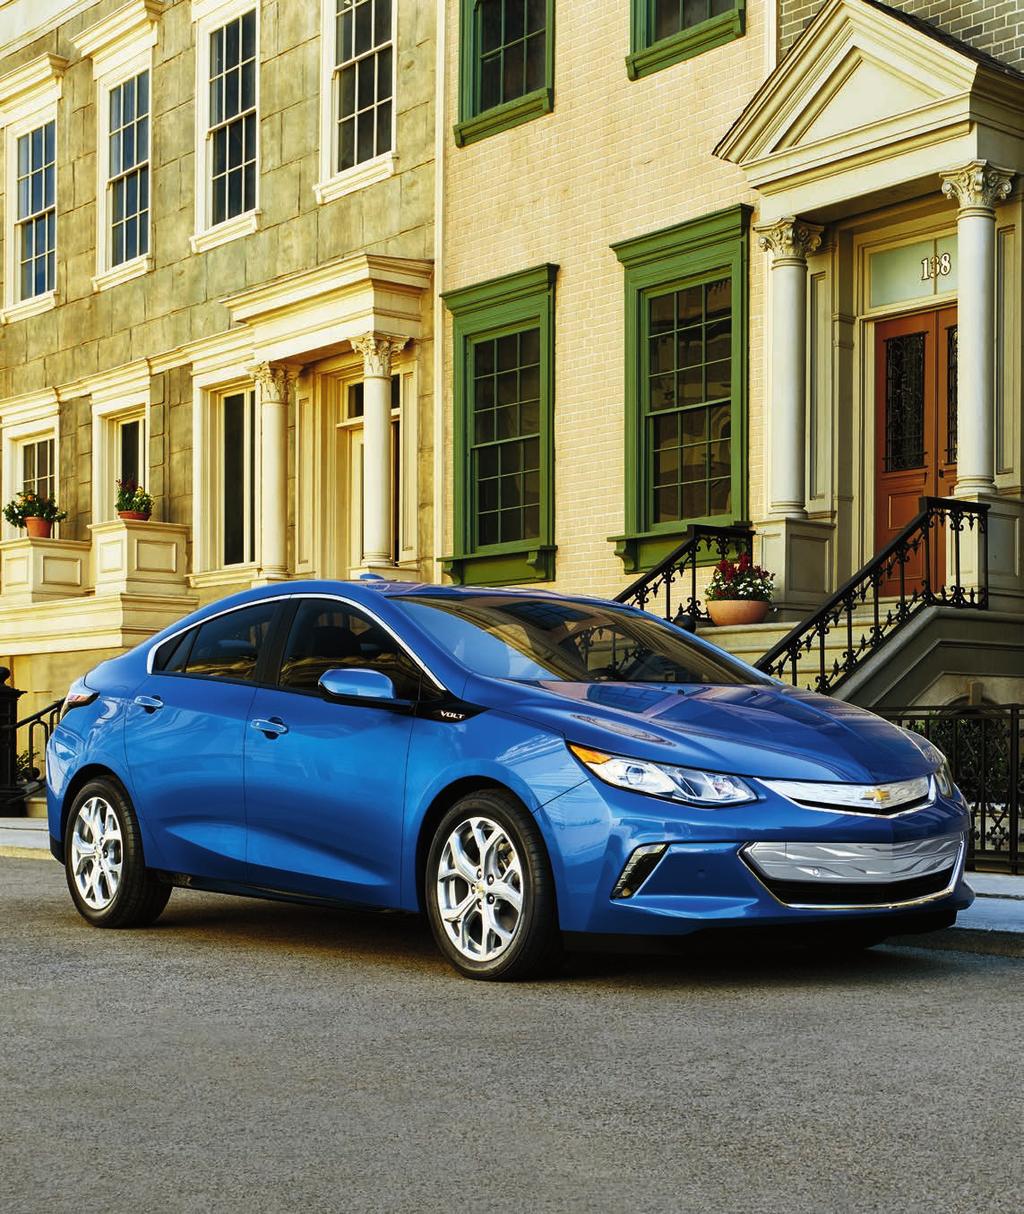 TAKE CHARGE OF EVERY DRIVE. You want to drive on your terms. Set your own limits. Go your own way. And the 2018 Chevrolet Volt gets that.